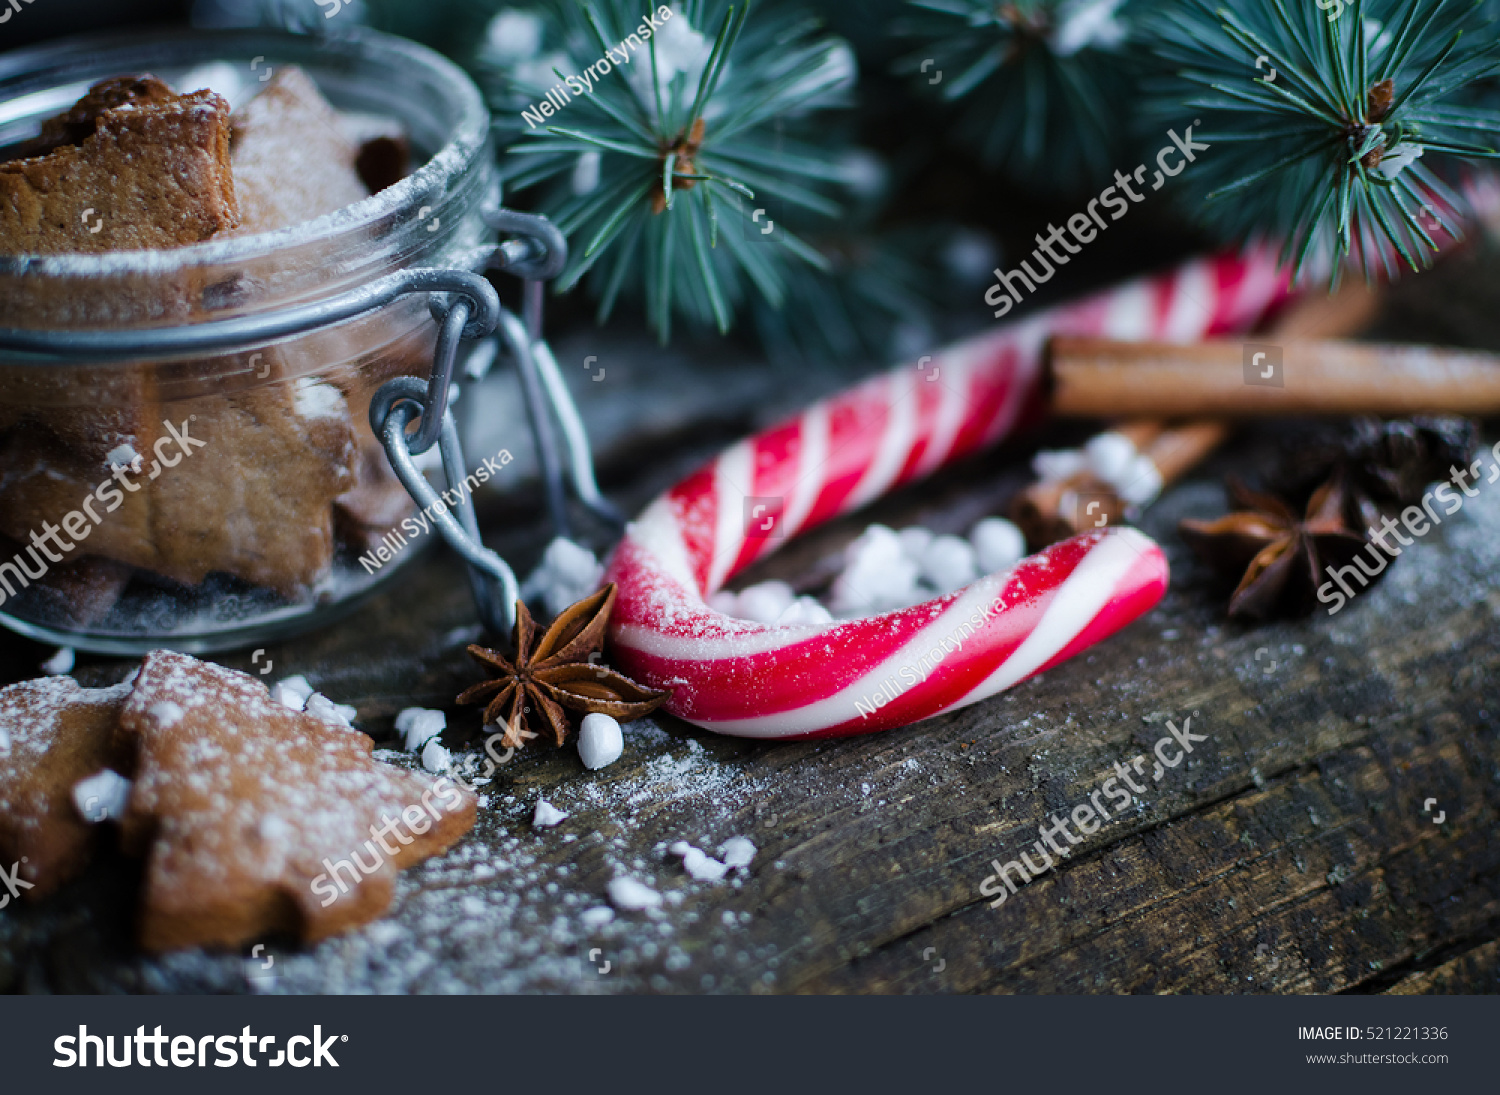 Christmas homemade gingerbread cookies and red candy cane on old wooden table with fir tree. Christmas treats concept. Christmas moody style background. Selective focus. Copy space. Toned image. #521221336